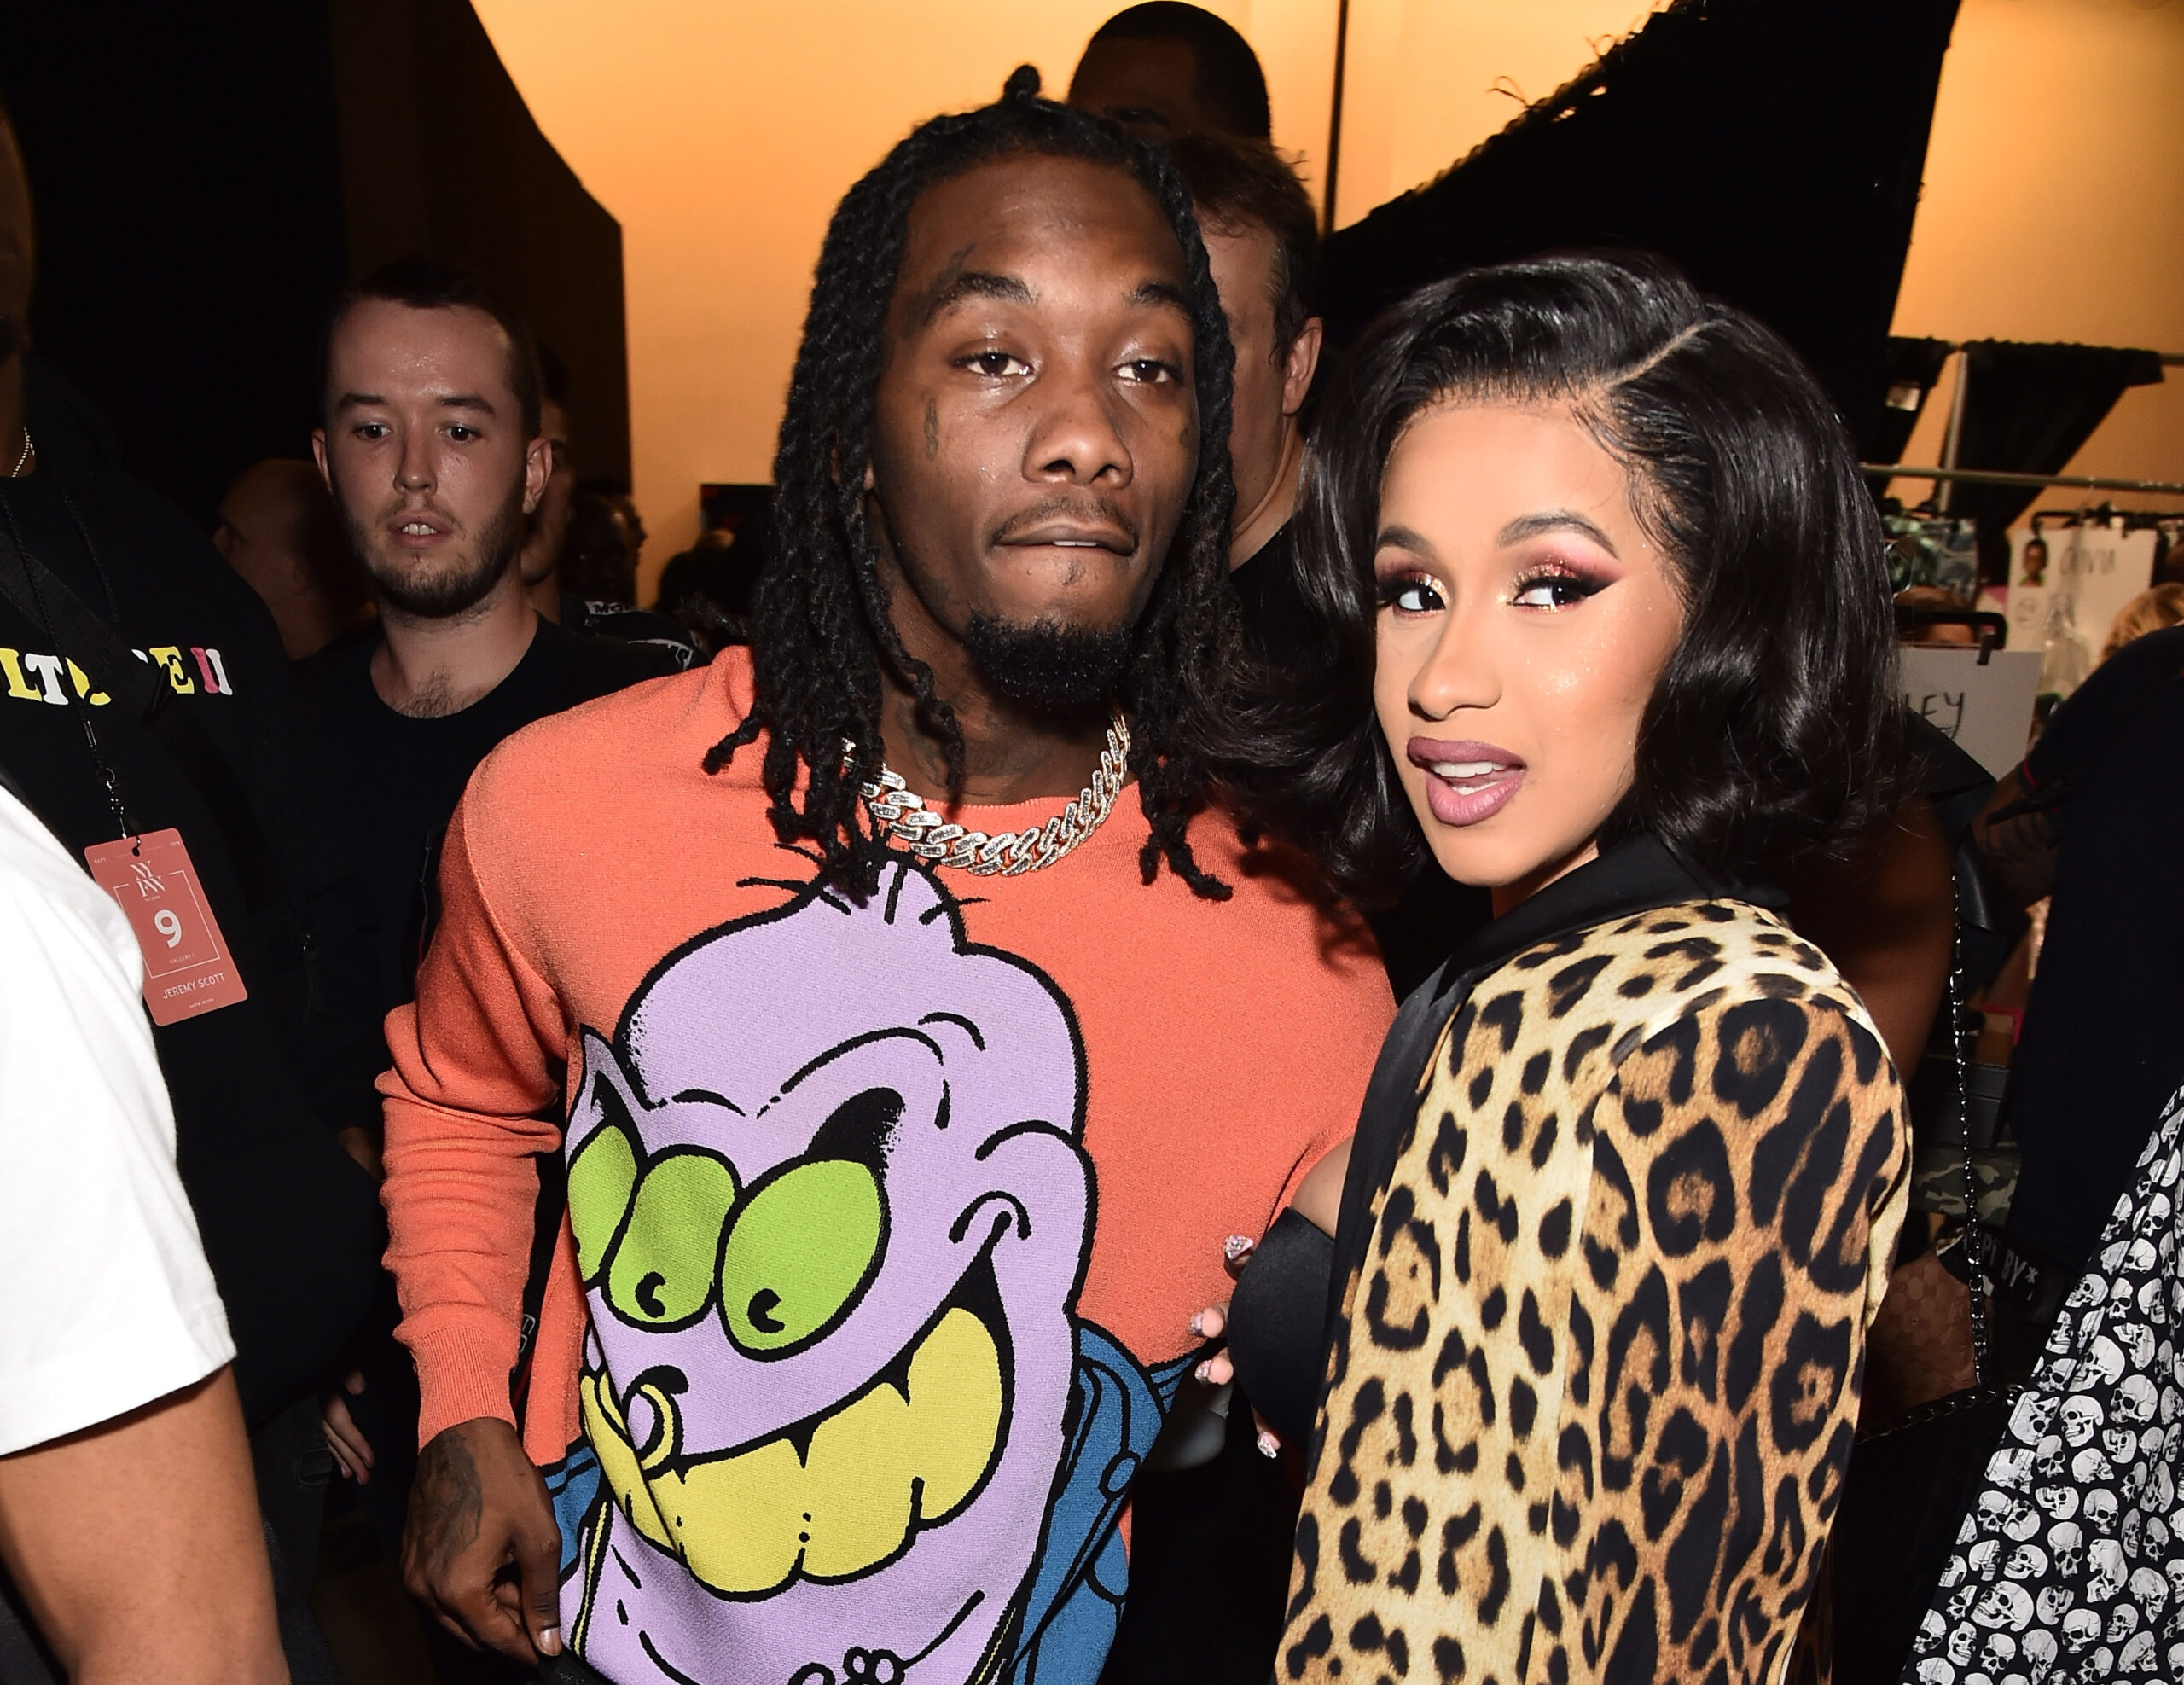 Offset Cheating Allegations Resurface After Kai Cenat Stream, Cardi B Reacts